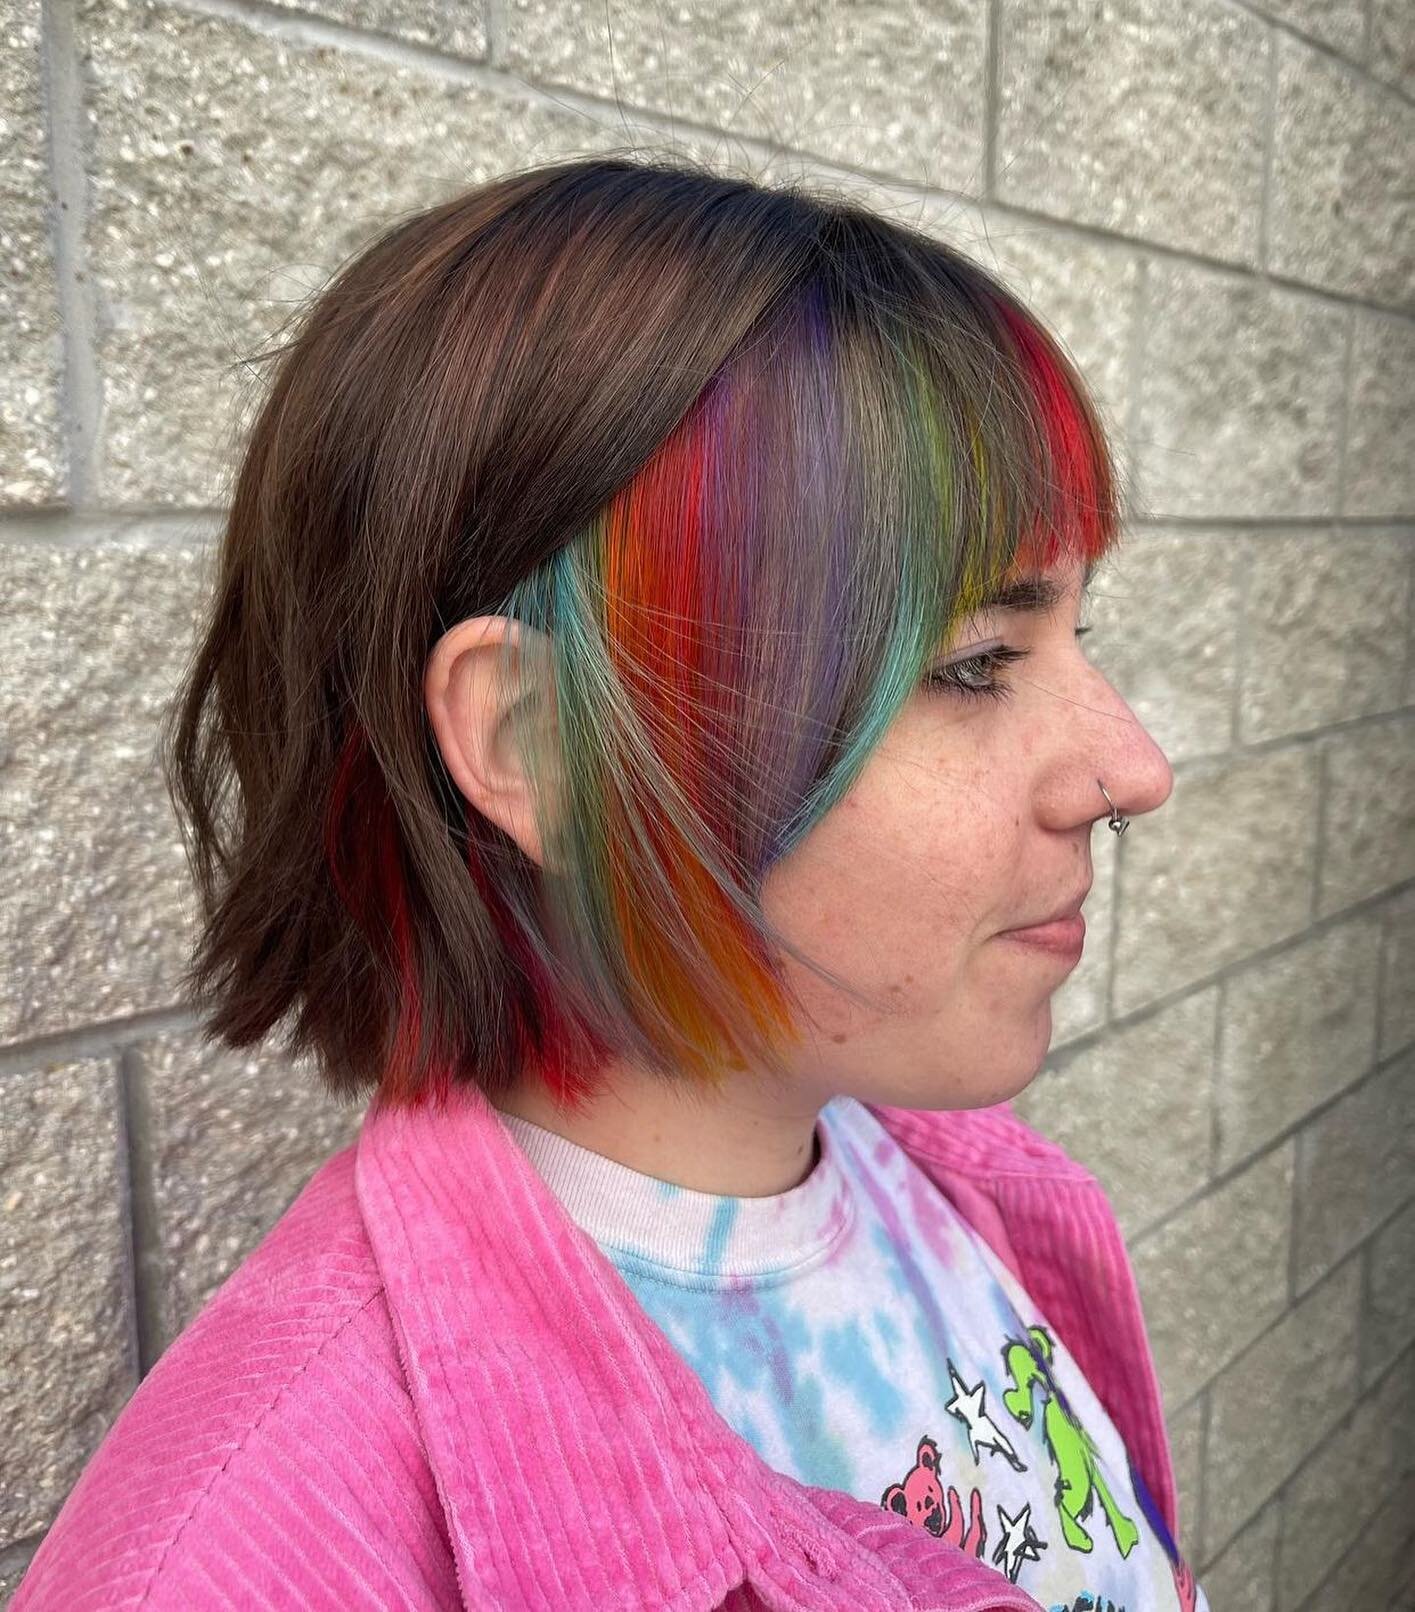 Don&rsquo;t forget to have fun with your hair 🌈Heath created these beautiful vivid colors in an elevated way. You can hide or expose them depending on your mood 🔸